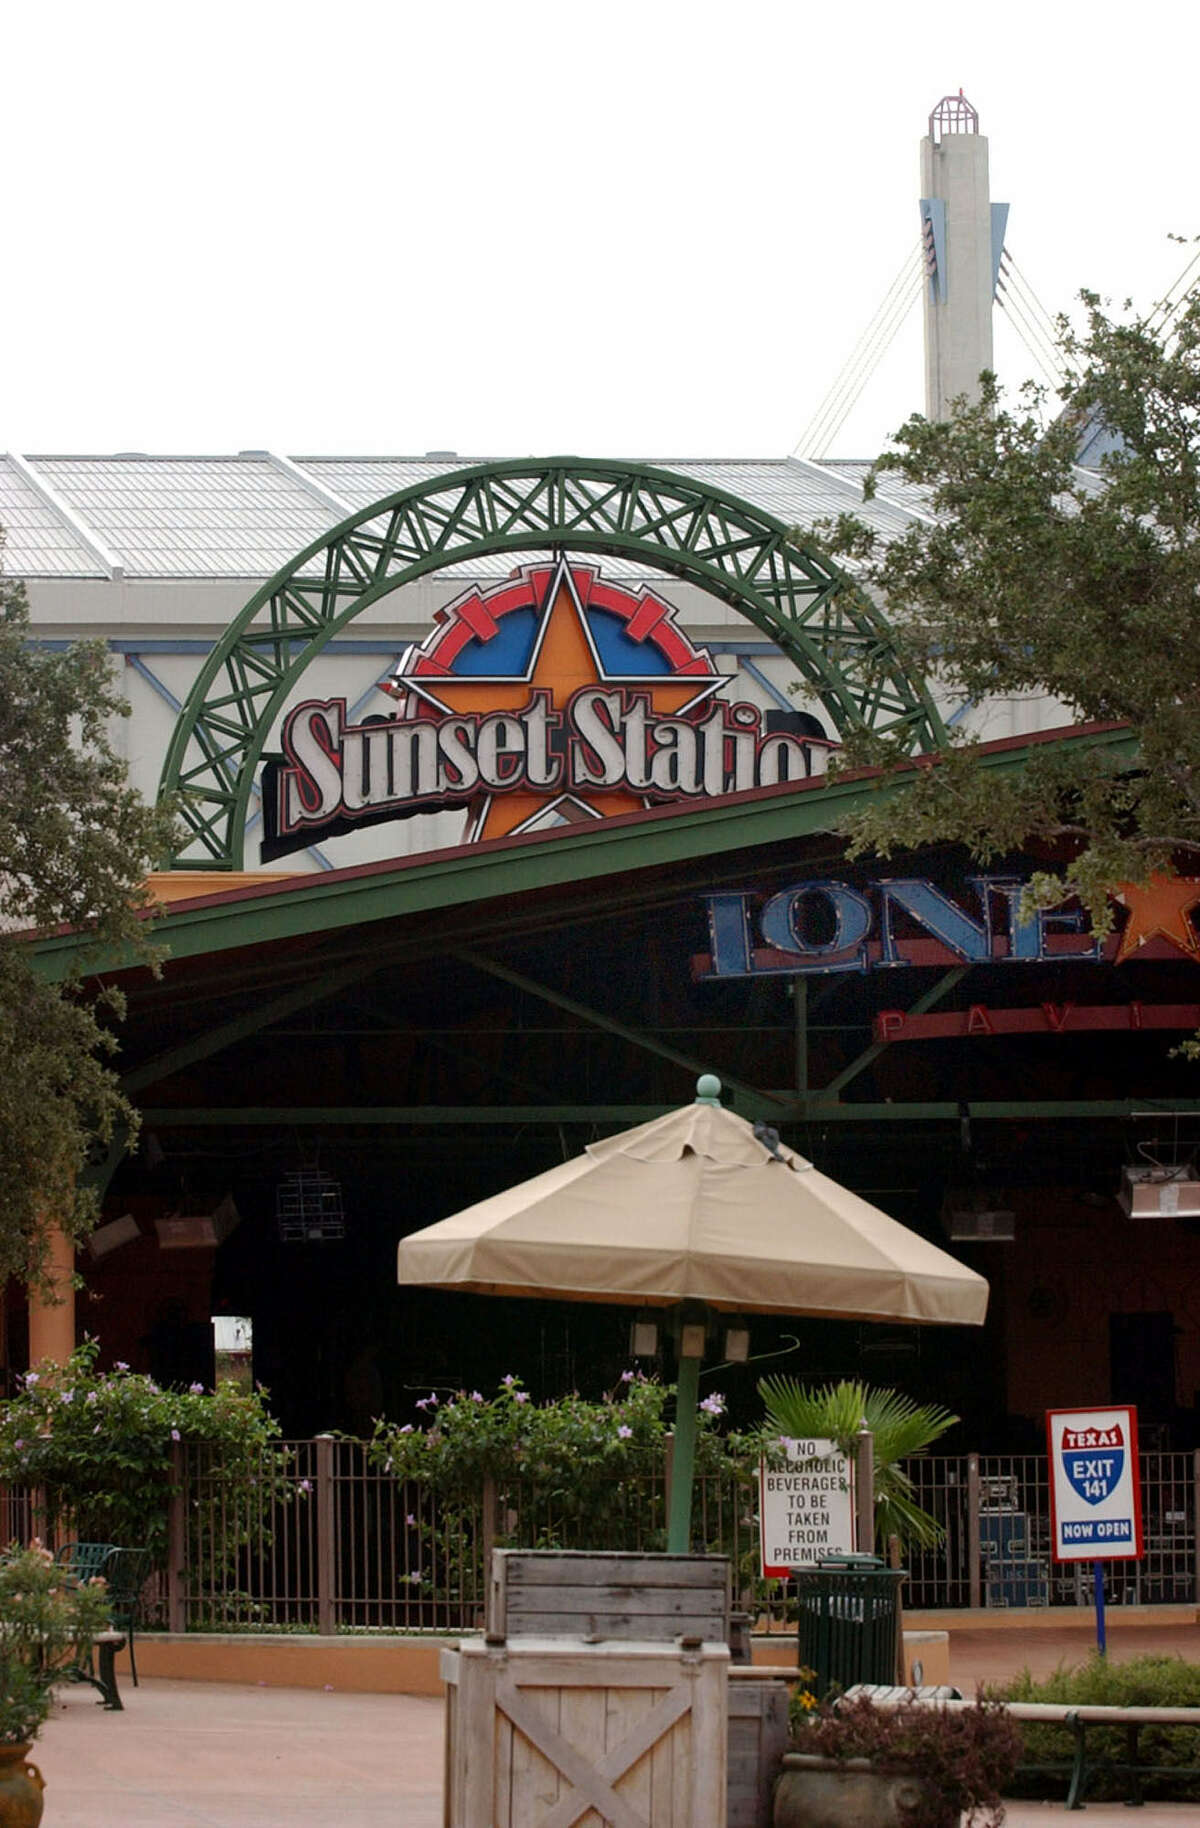 Sunset Station will undergo a renaming and redesign as part of local developers’ plans to revive St. Paul Square.